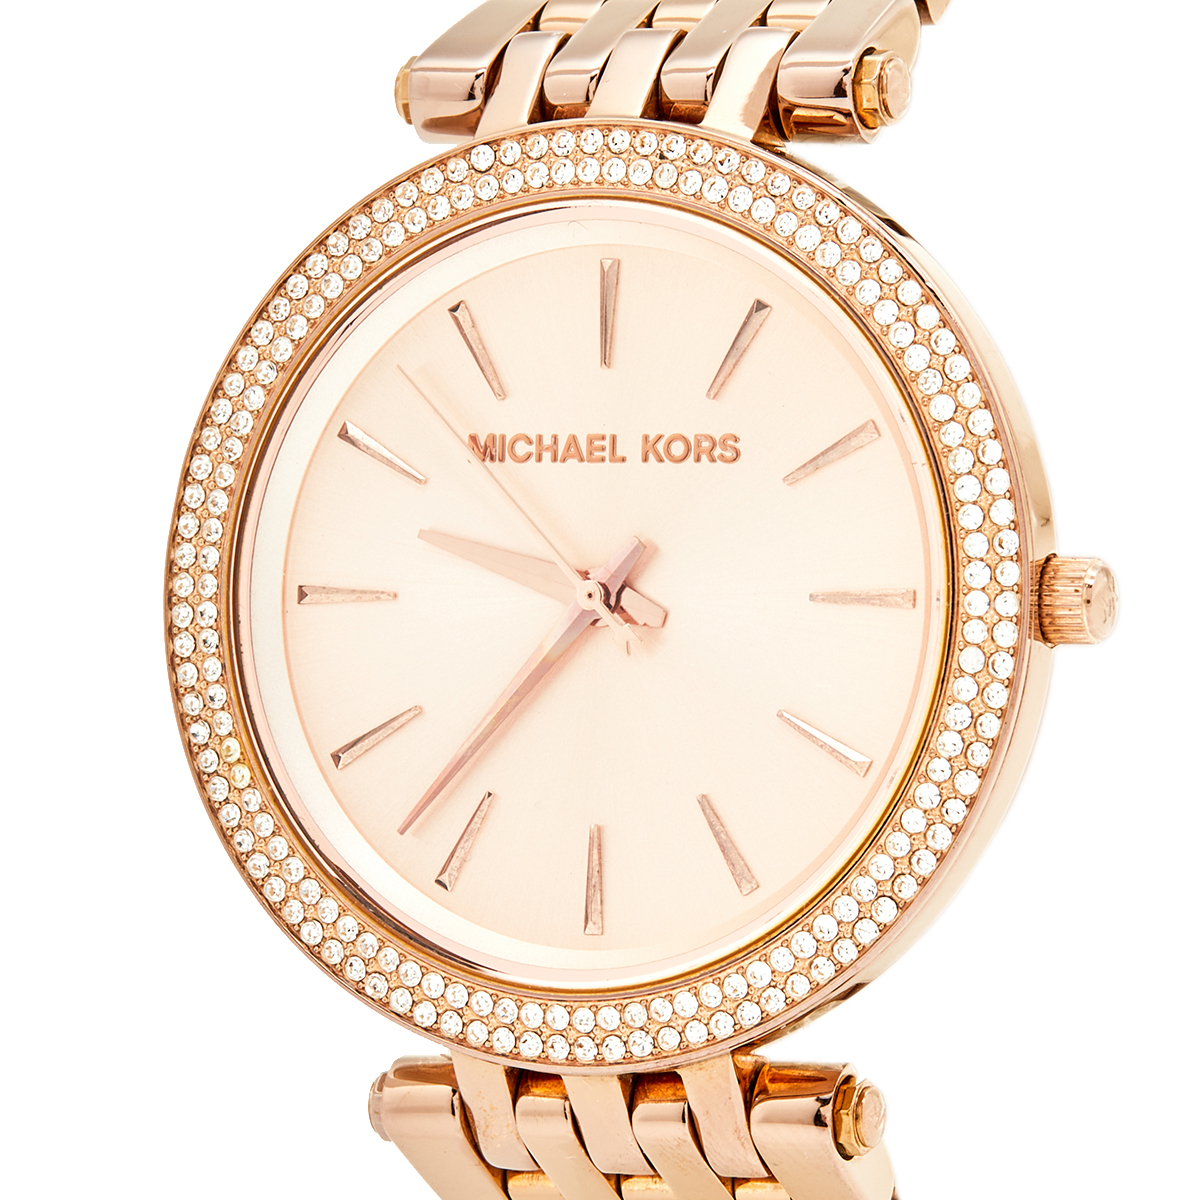 

Michael Kors Champagne Rose Gold Plated Stainless Steel Darci MK3192 Women's Wristwatch